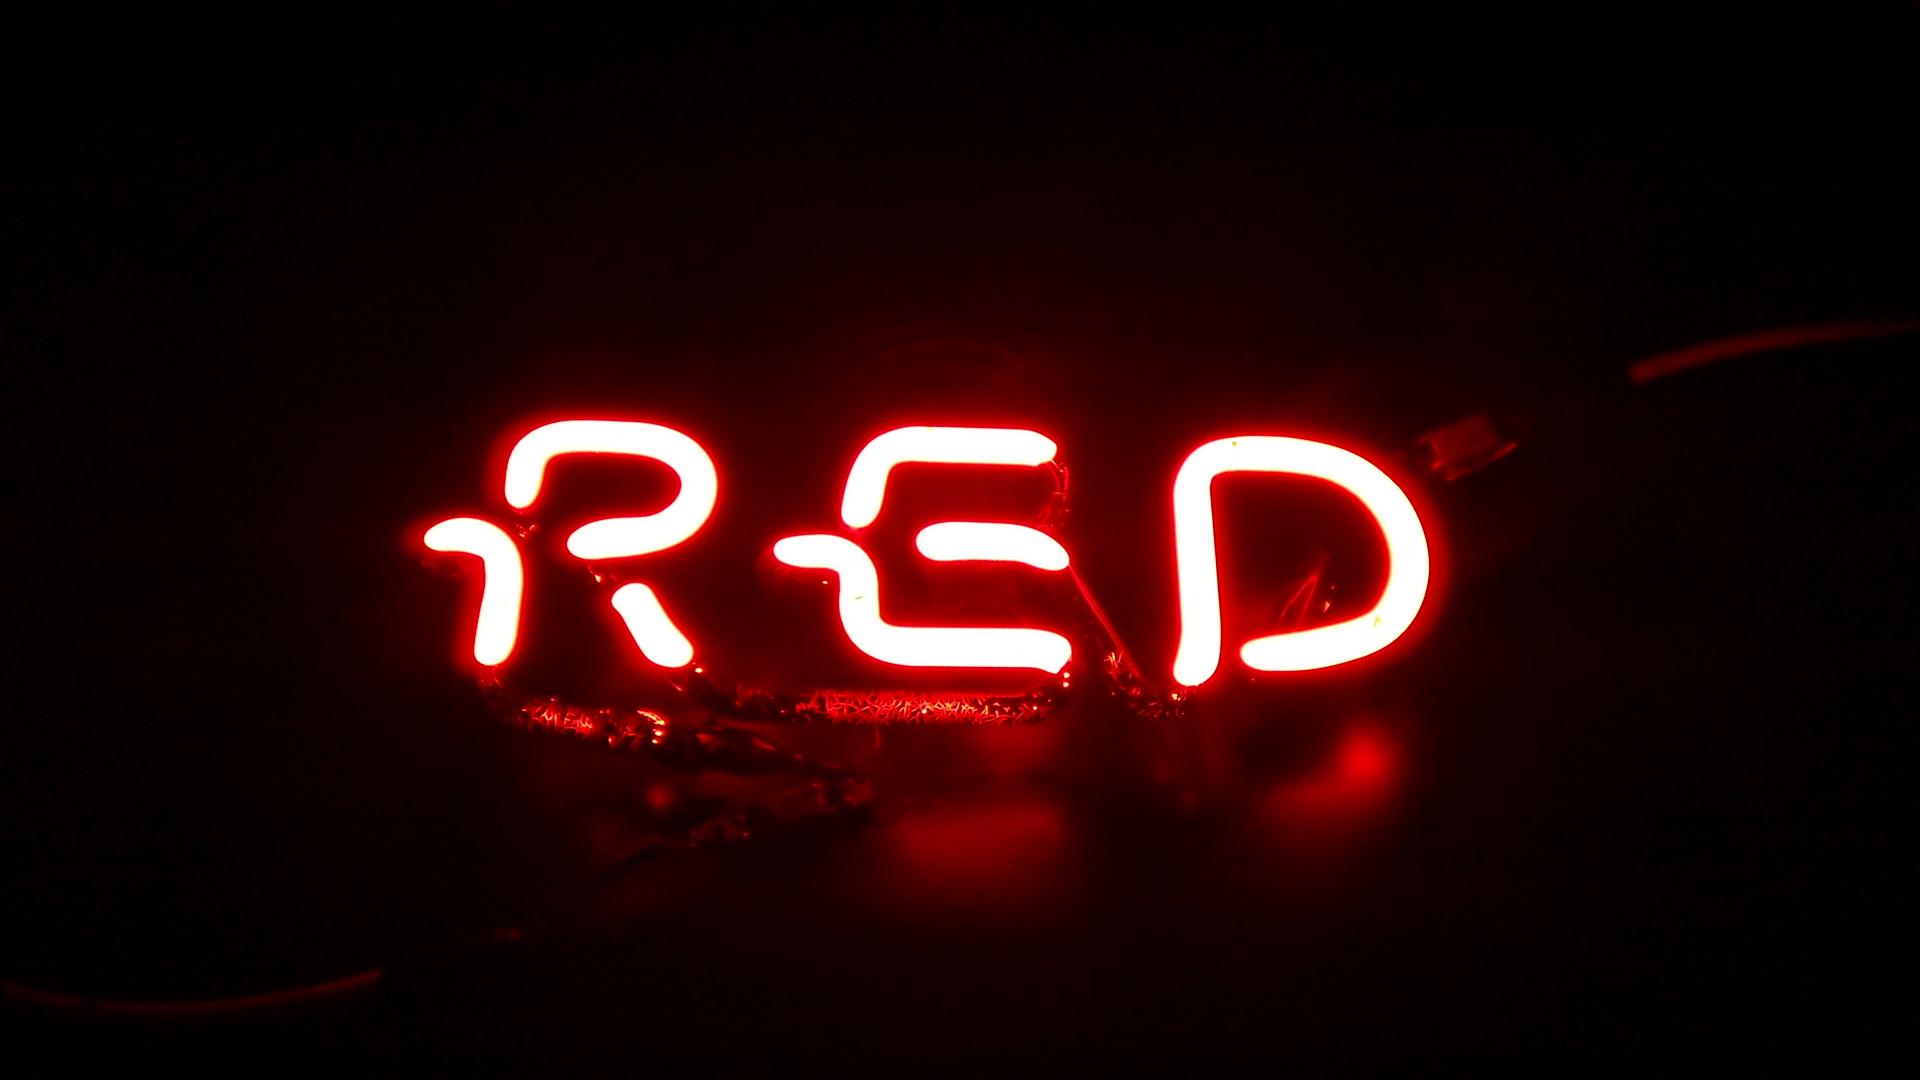 A red neon sign that says 